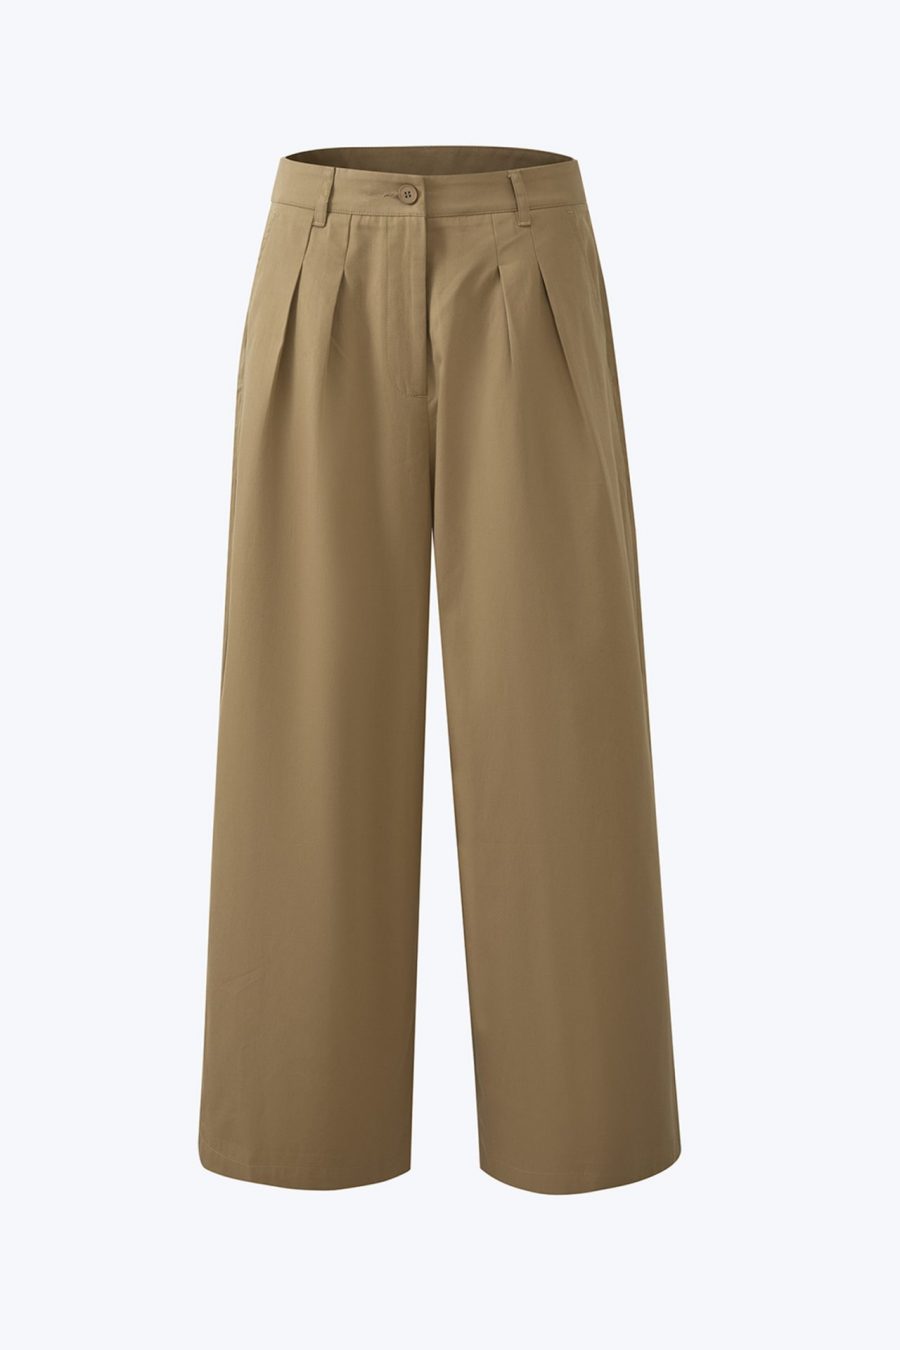 CPL001138A Pleated Trousers KHAKI